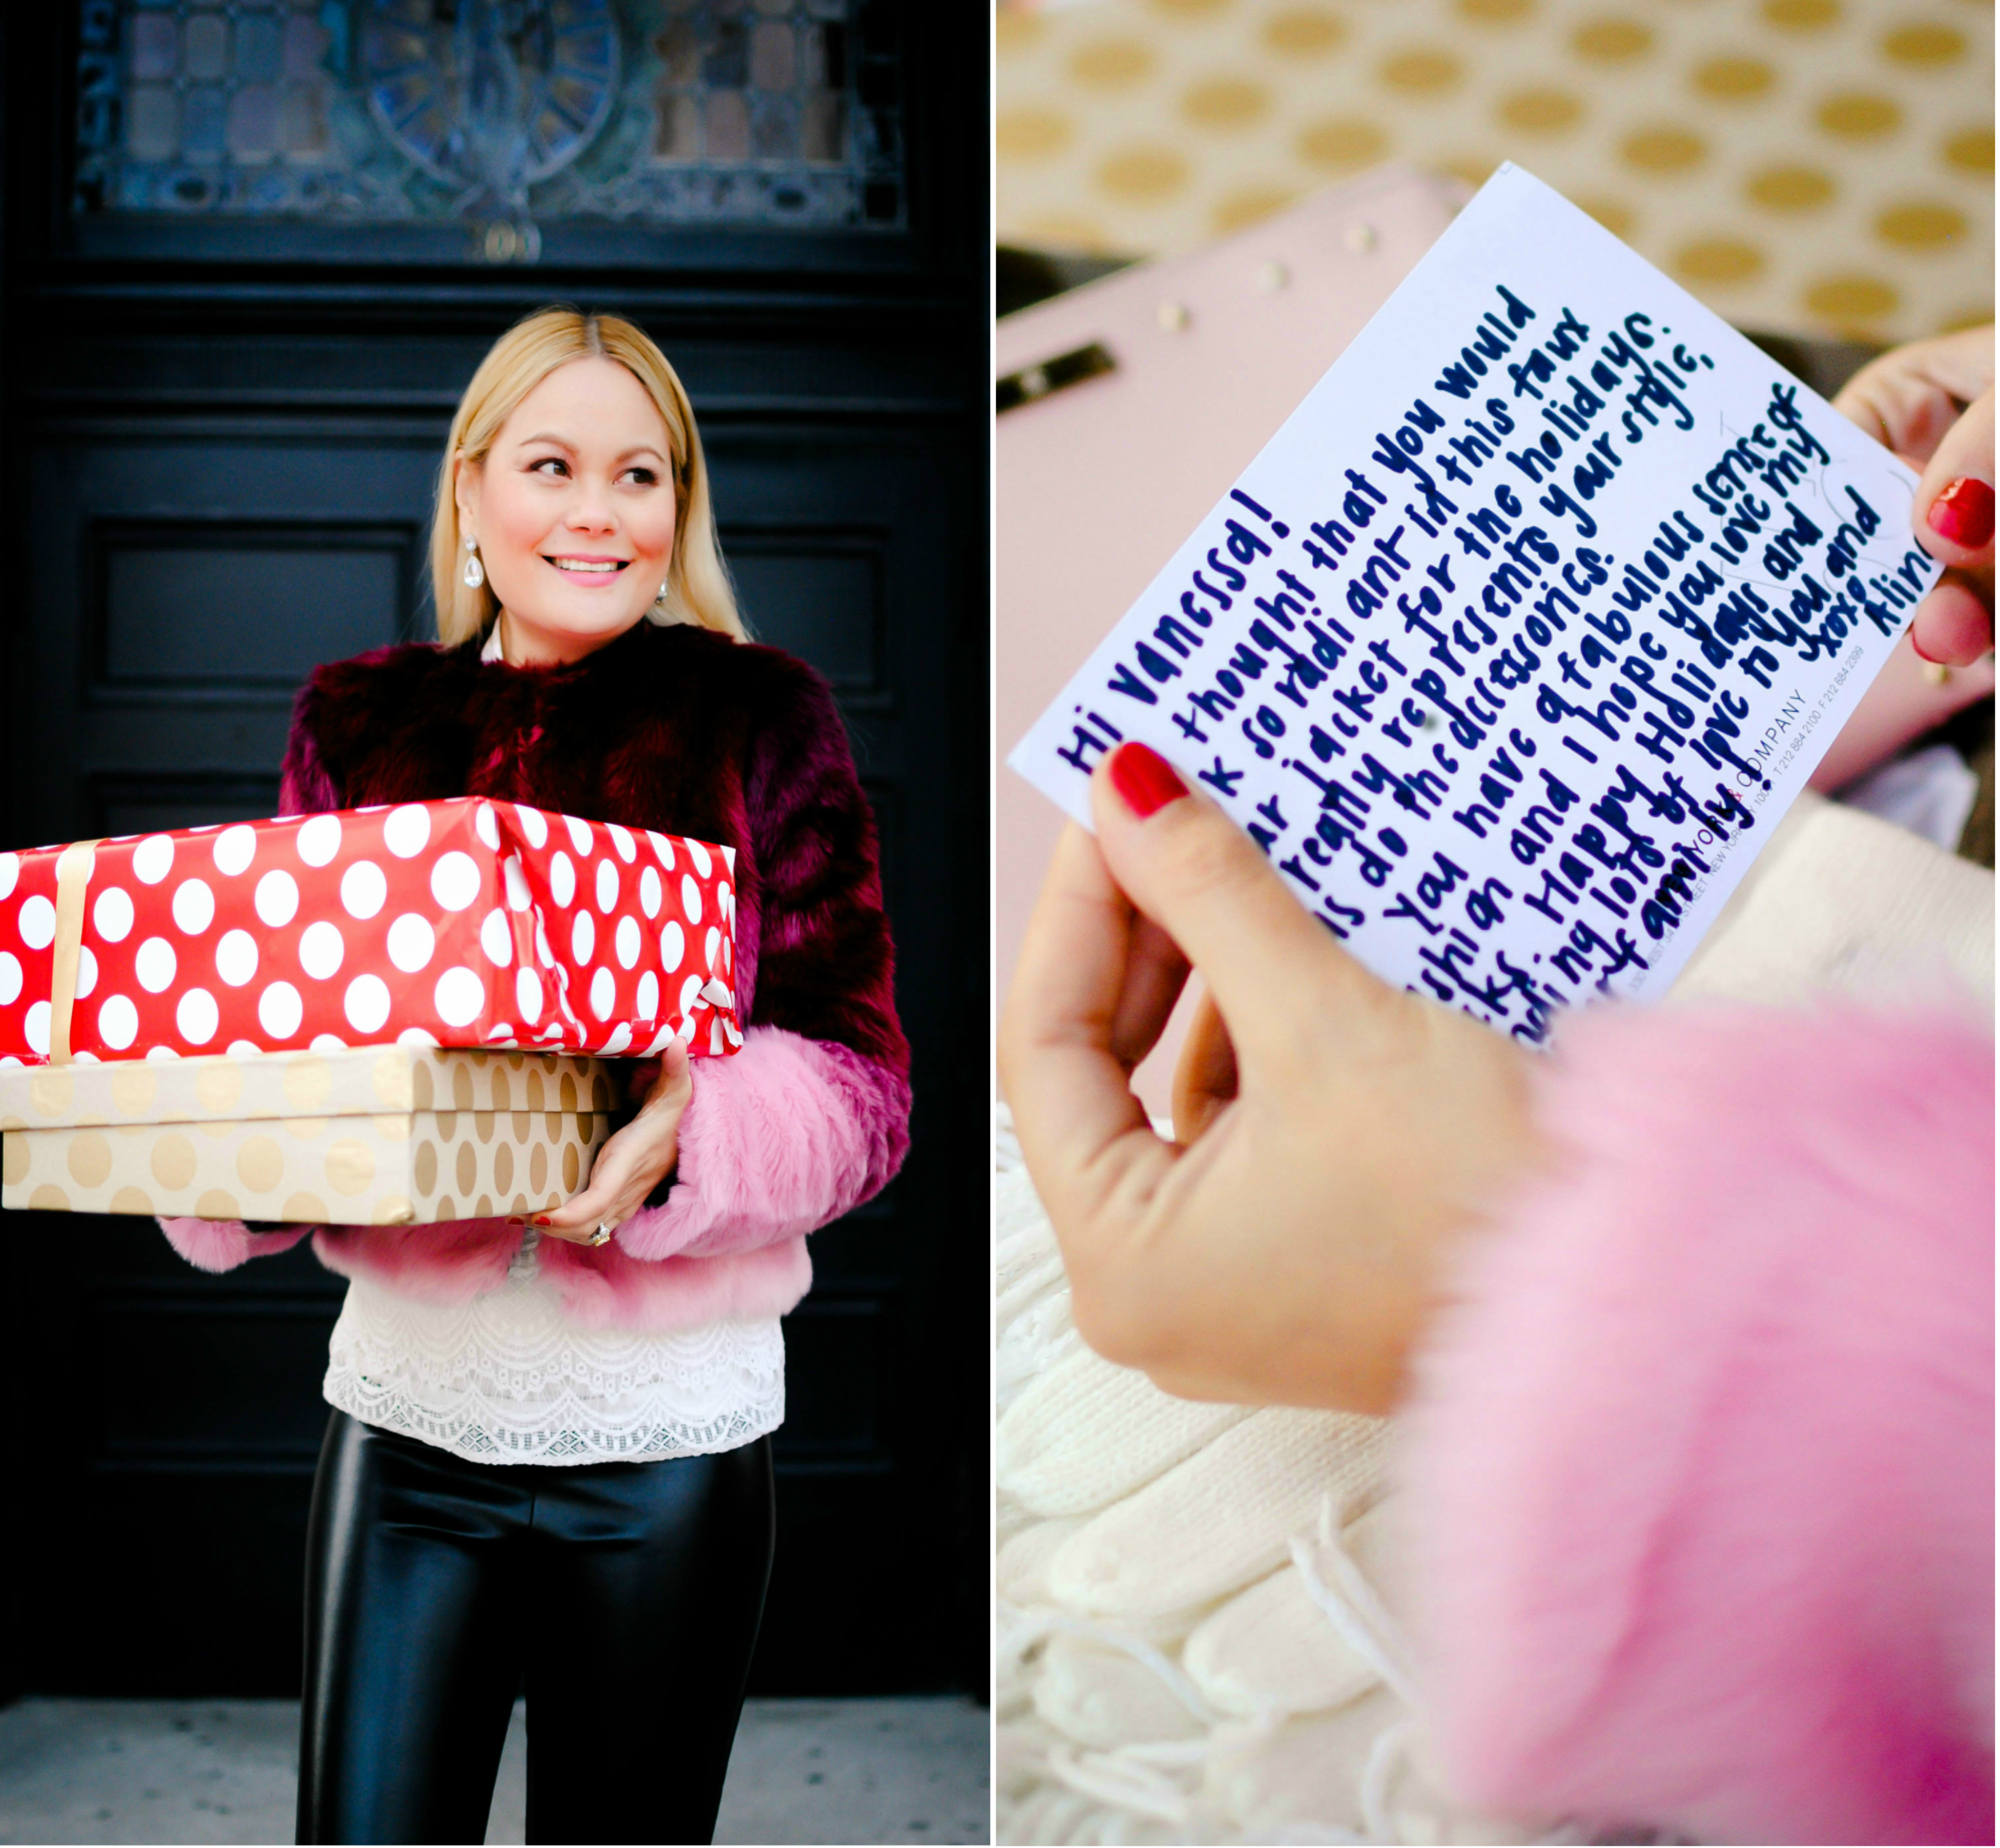 vanessa-lambert-blogger-behind-what-would-v-wear-reveals-her-secret-santa-unrwrapping-gifts-from-new-york-and-company_9